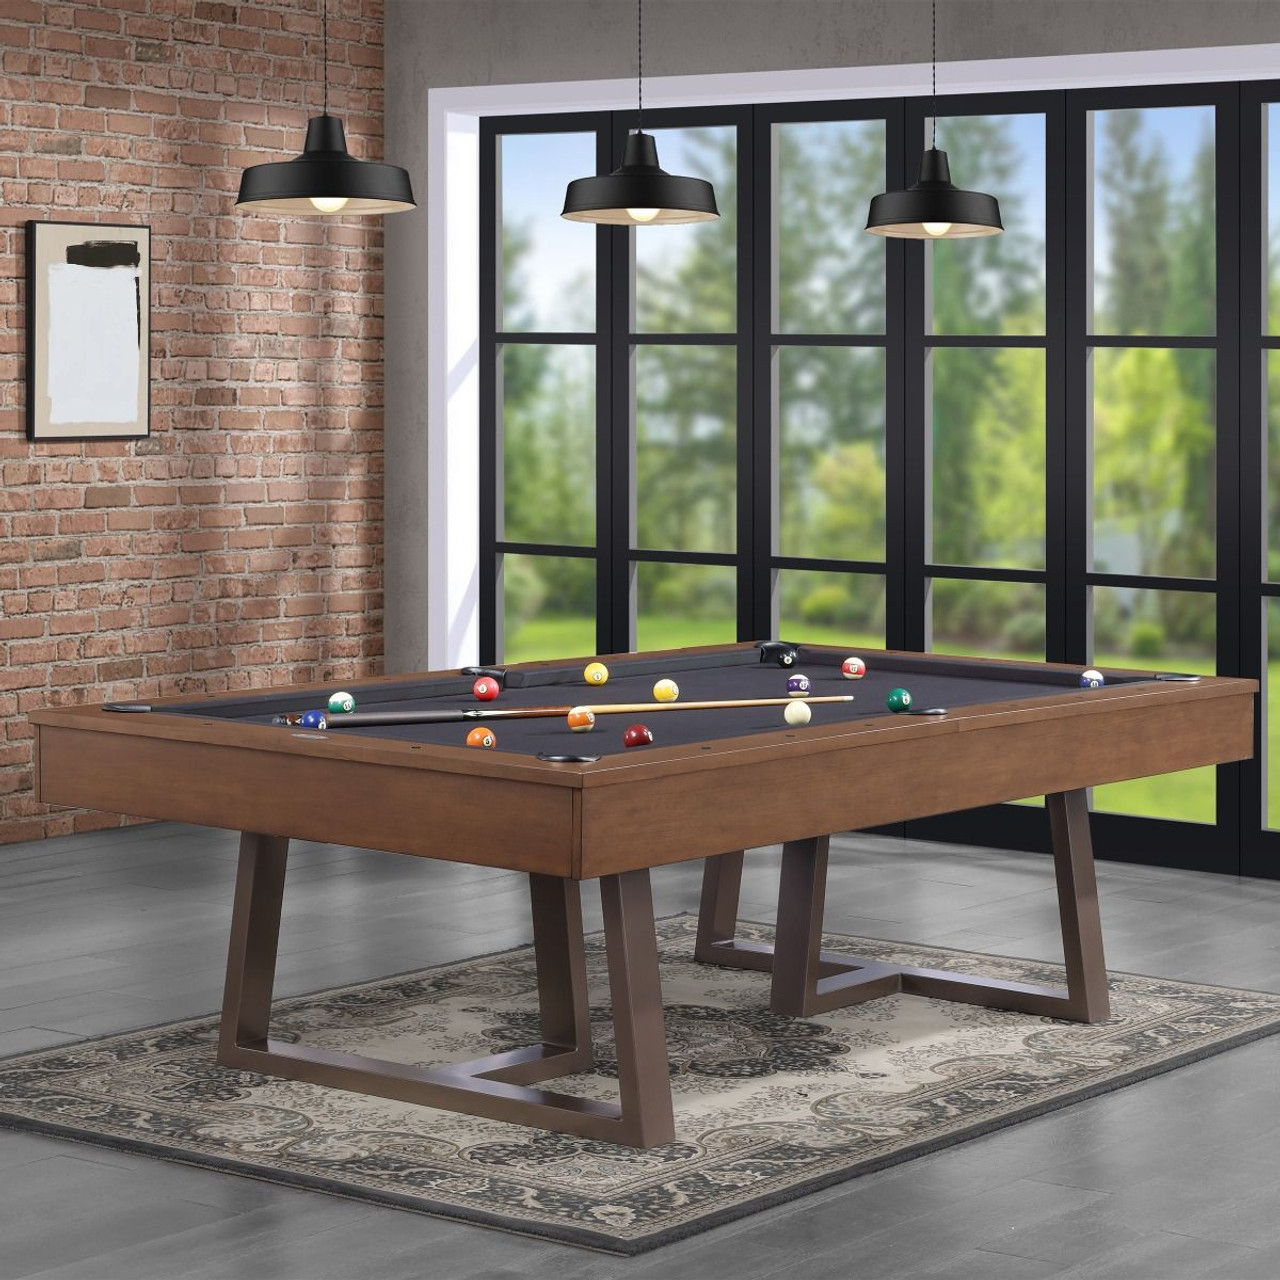 Axial Pool Table | 8 Foot | Whiskey or Smoke Finish | Black ...